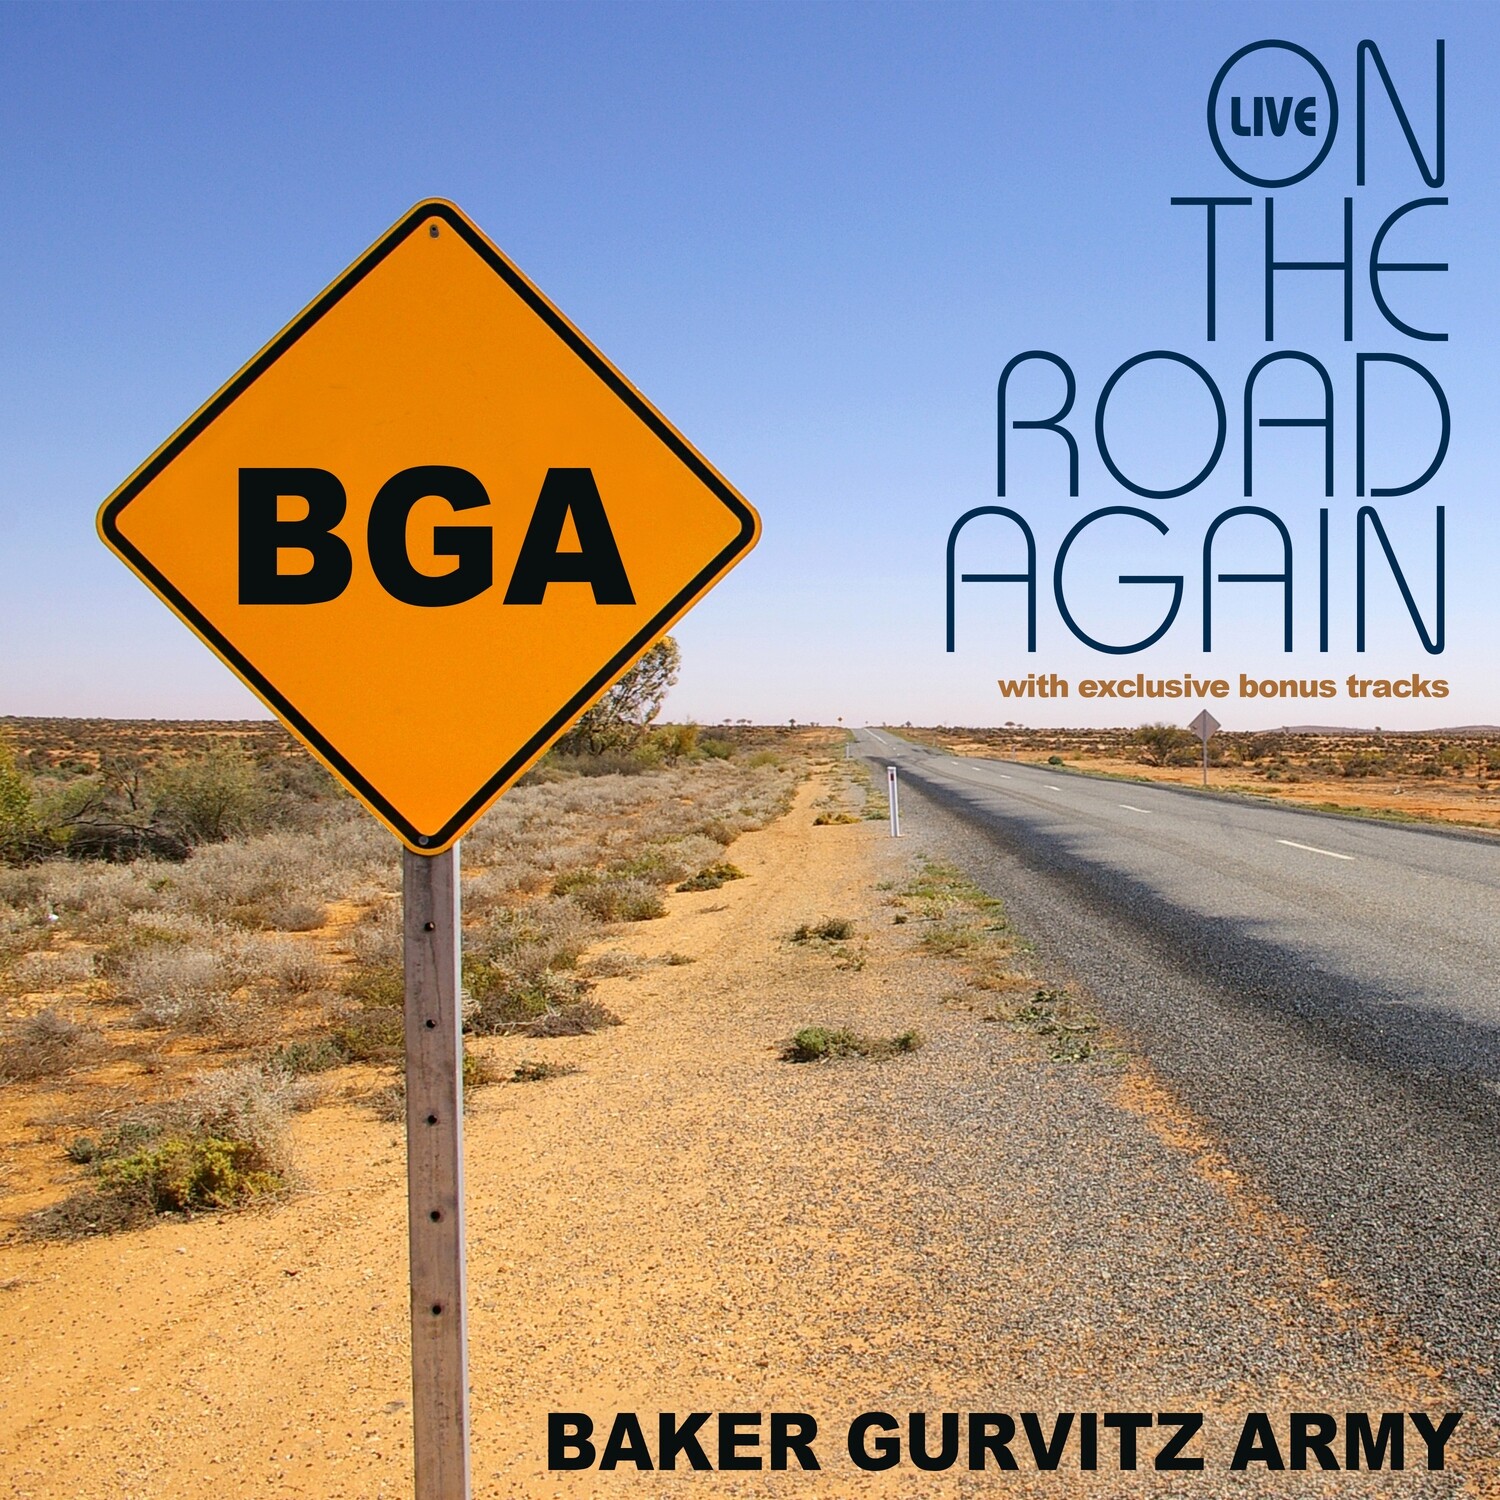 Baker Gurvitz Army - On The Road Again (Live)